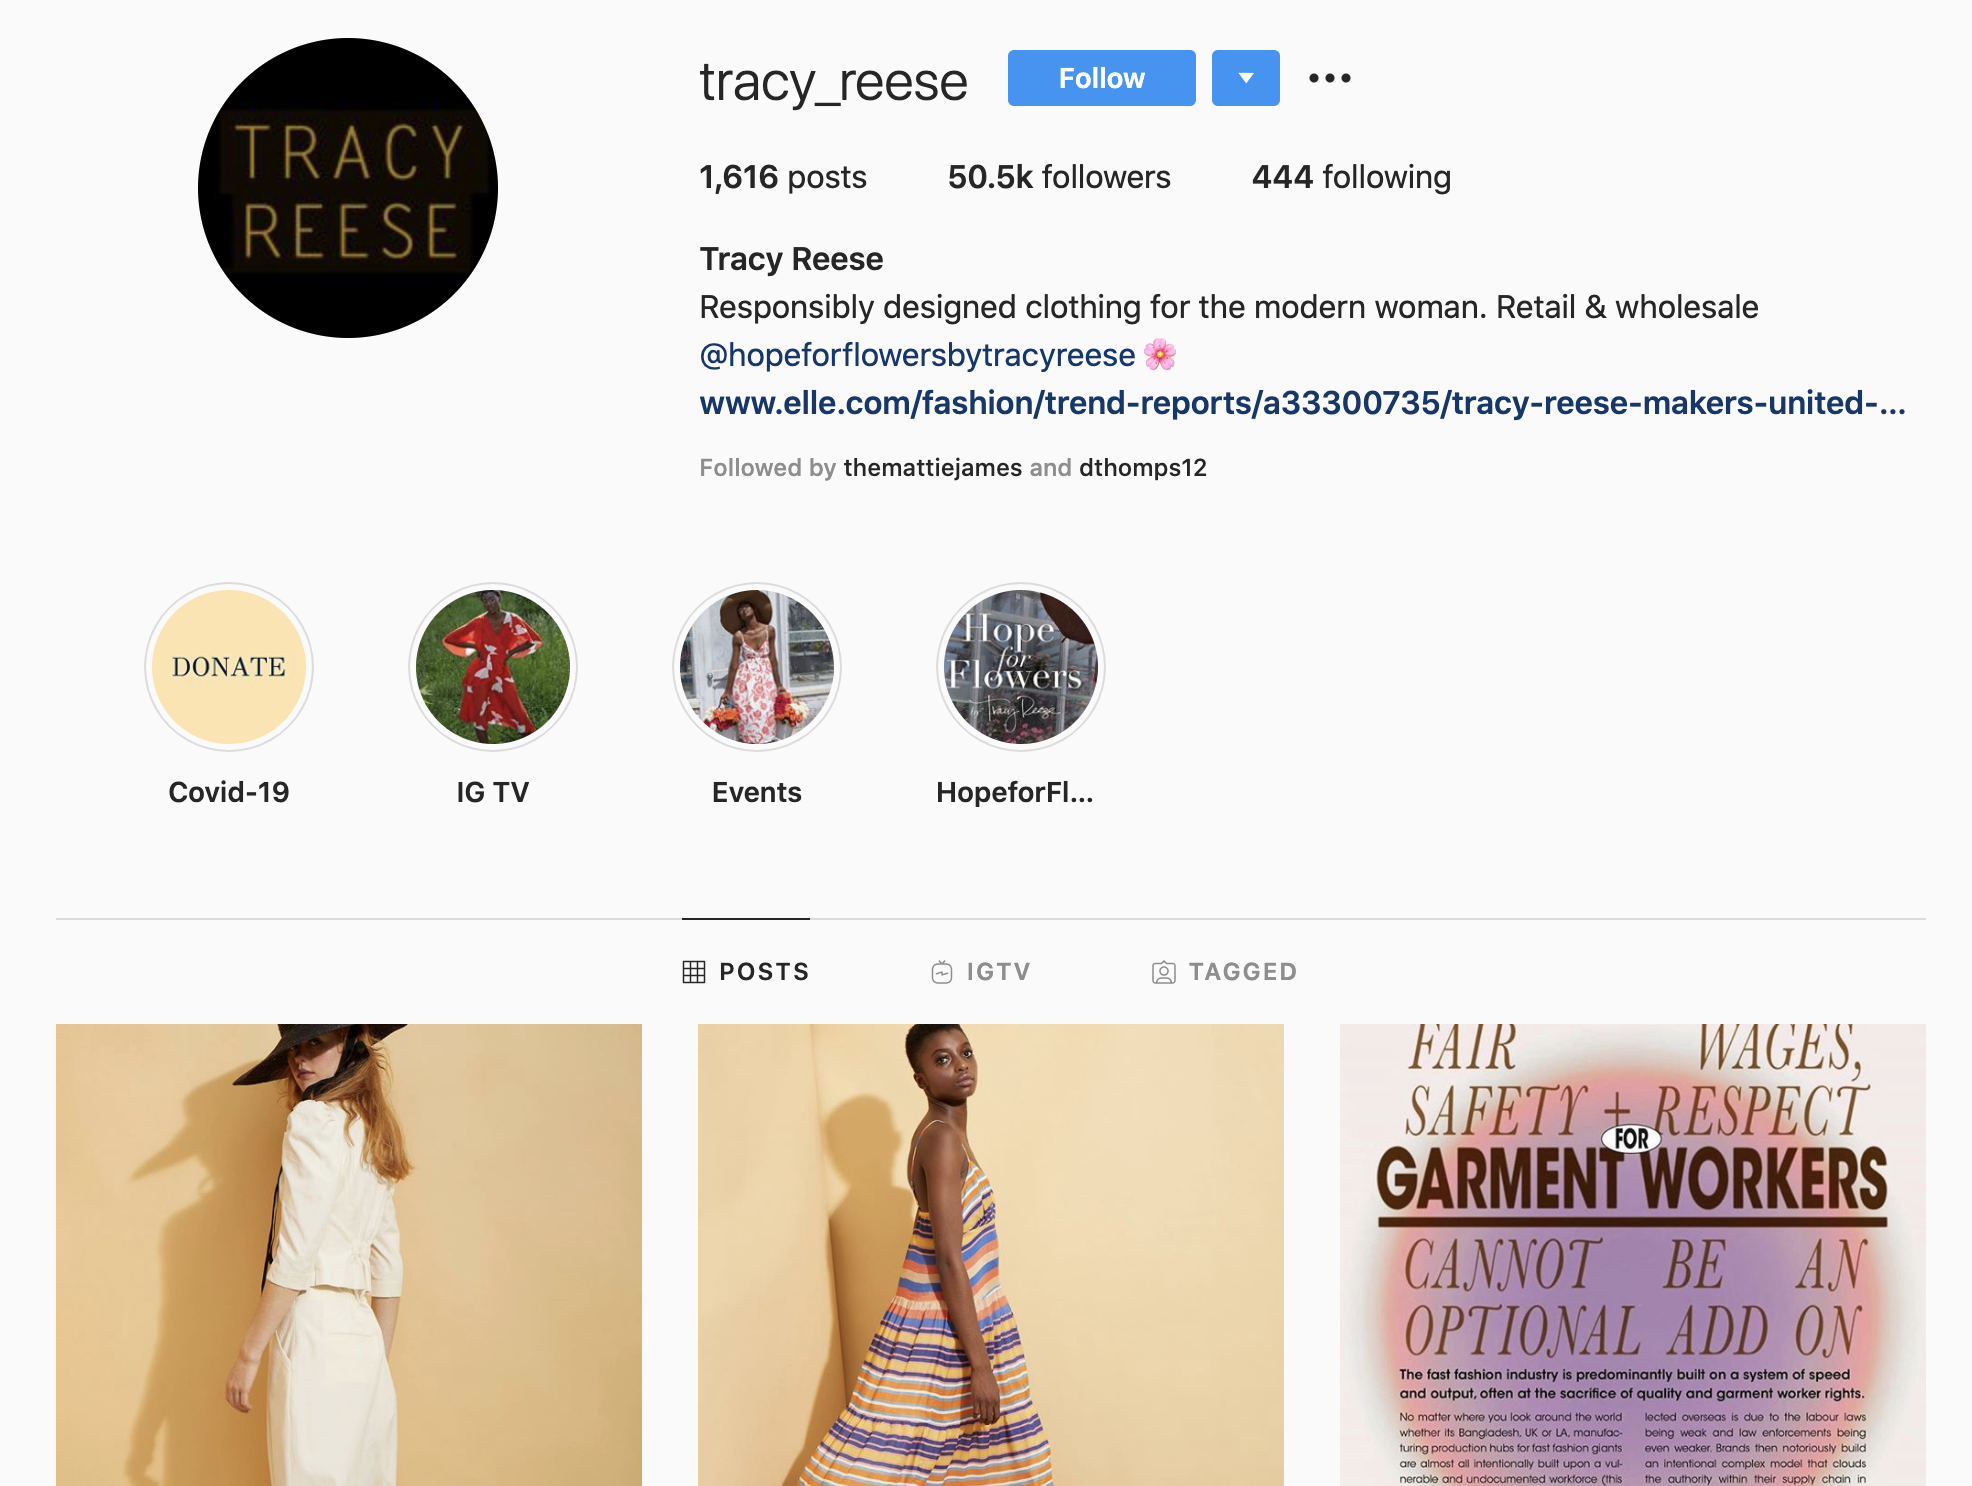 Screenshot of Tracy Reese's Instagram account.